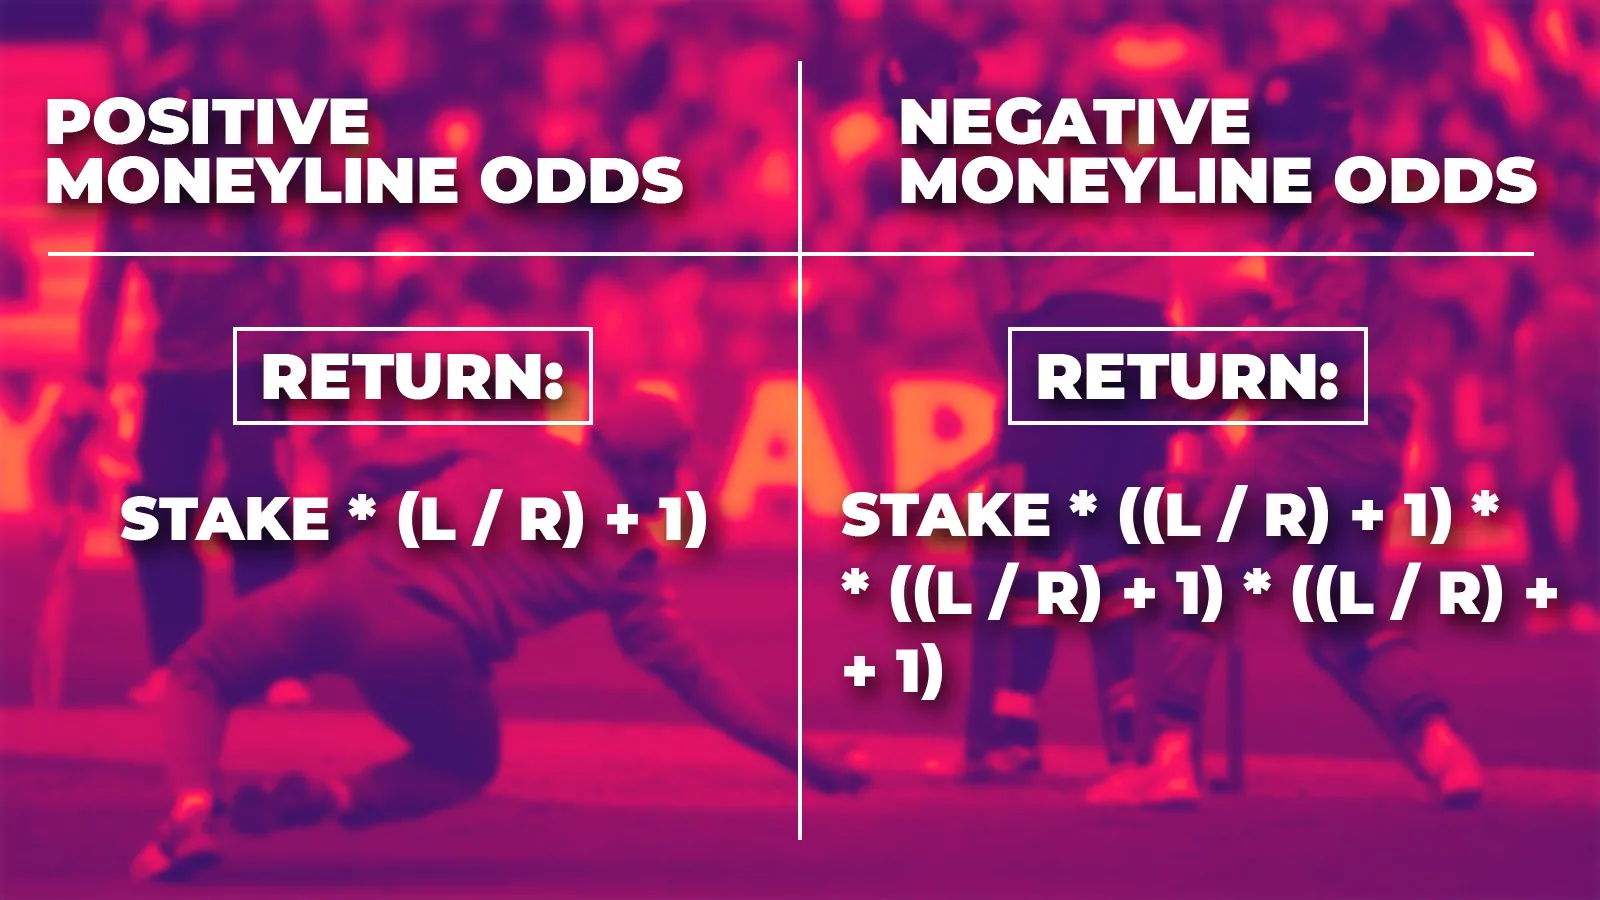 These betting odds require a little mathematics to calculate the probable profit.